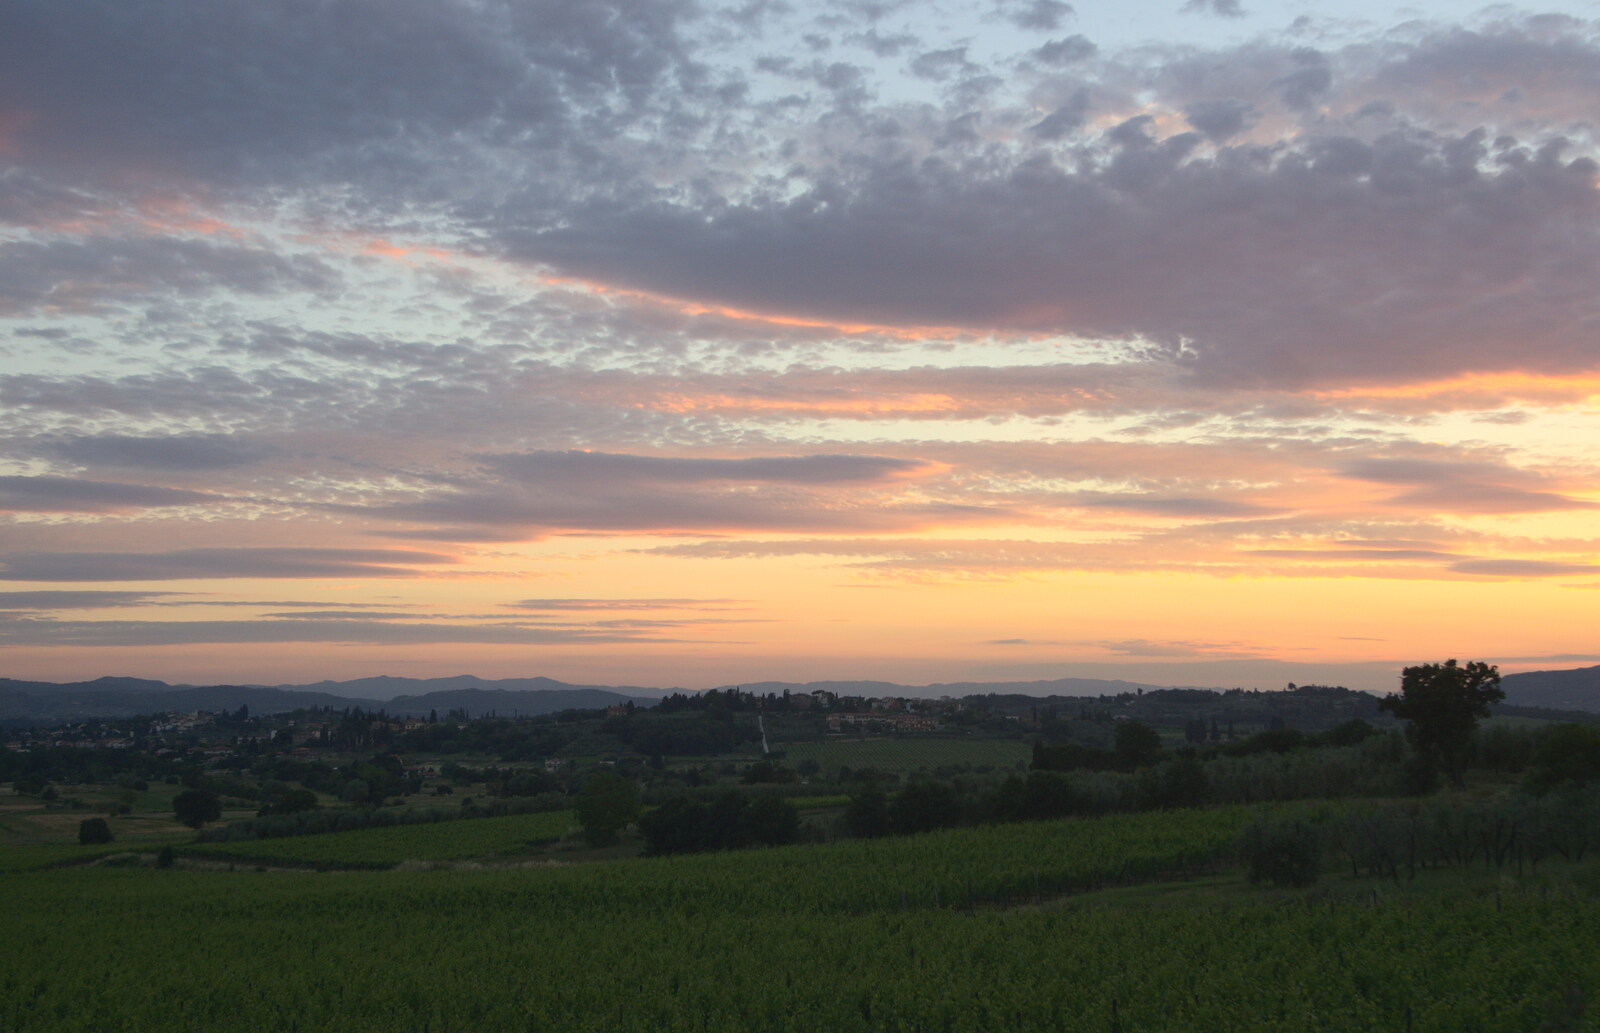 Sunset over Tuscany from La Verna Monastery and the Fireflies of Tuscany, Italy - 14th June 2013